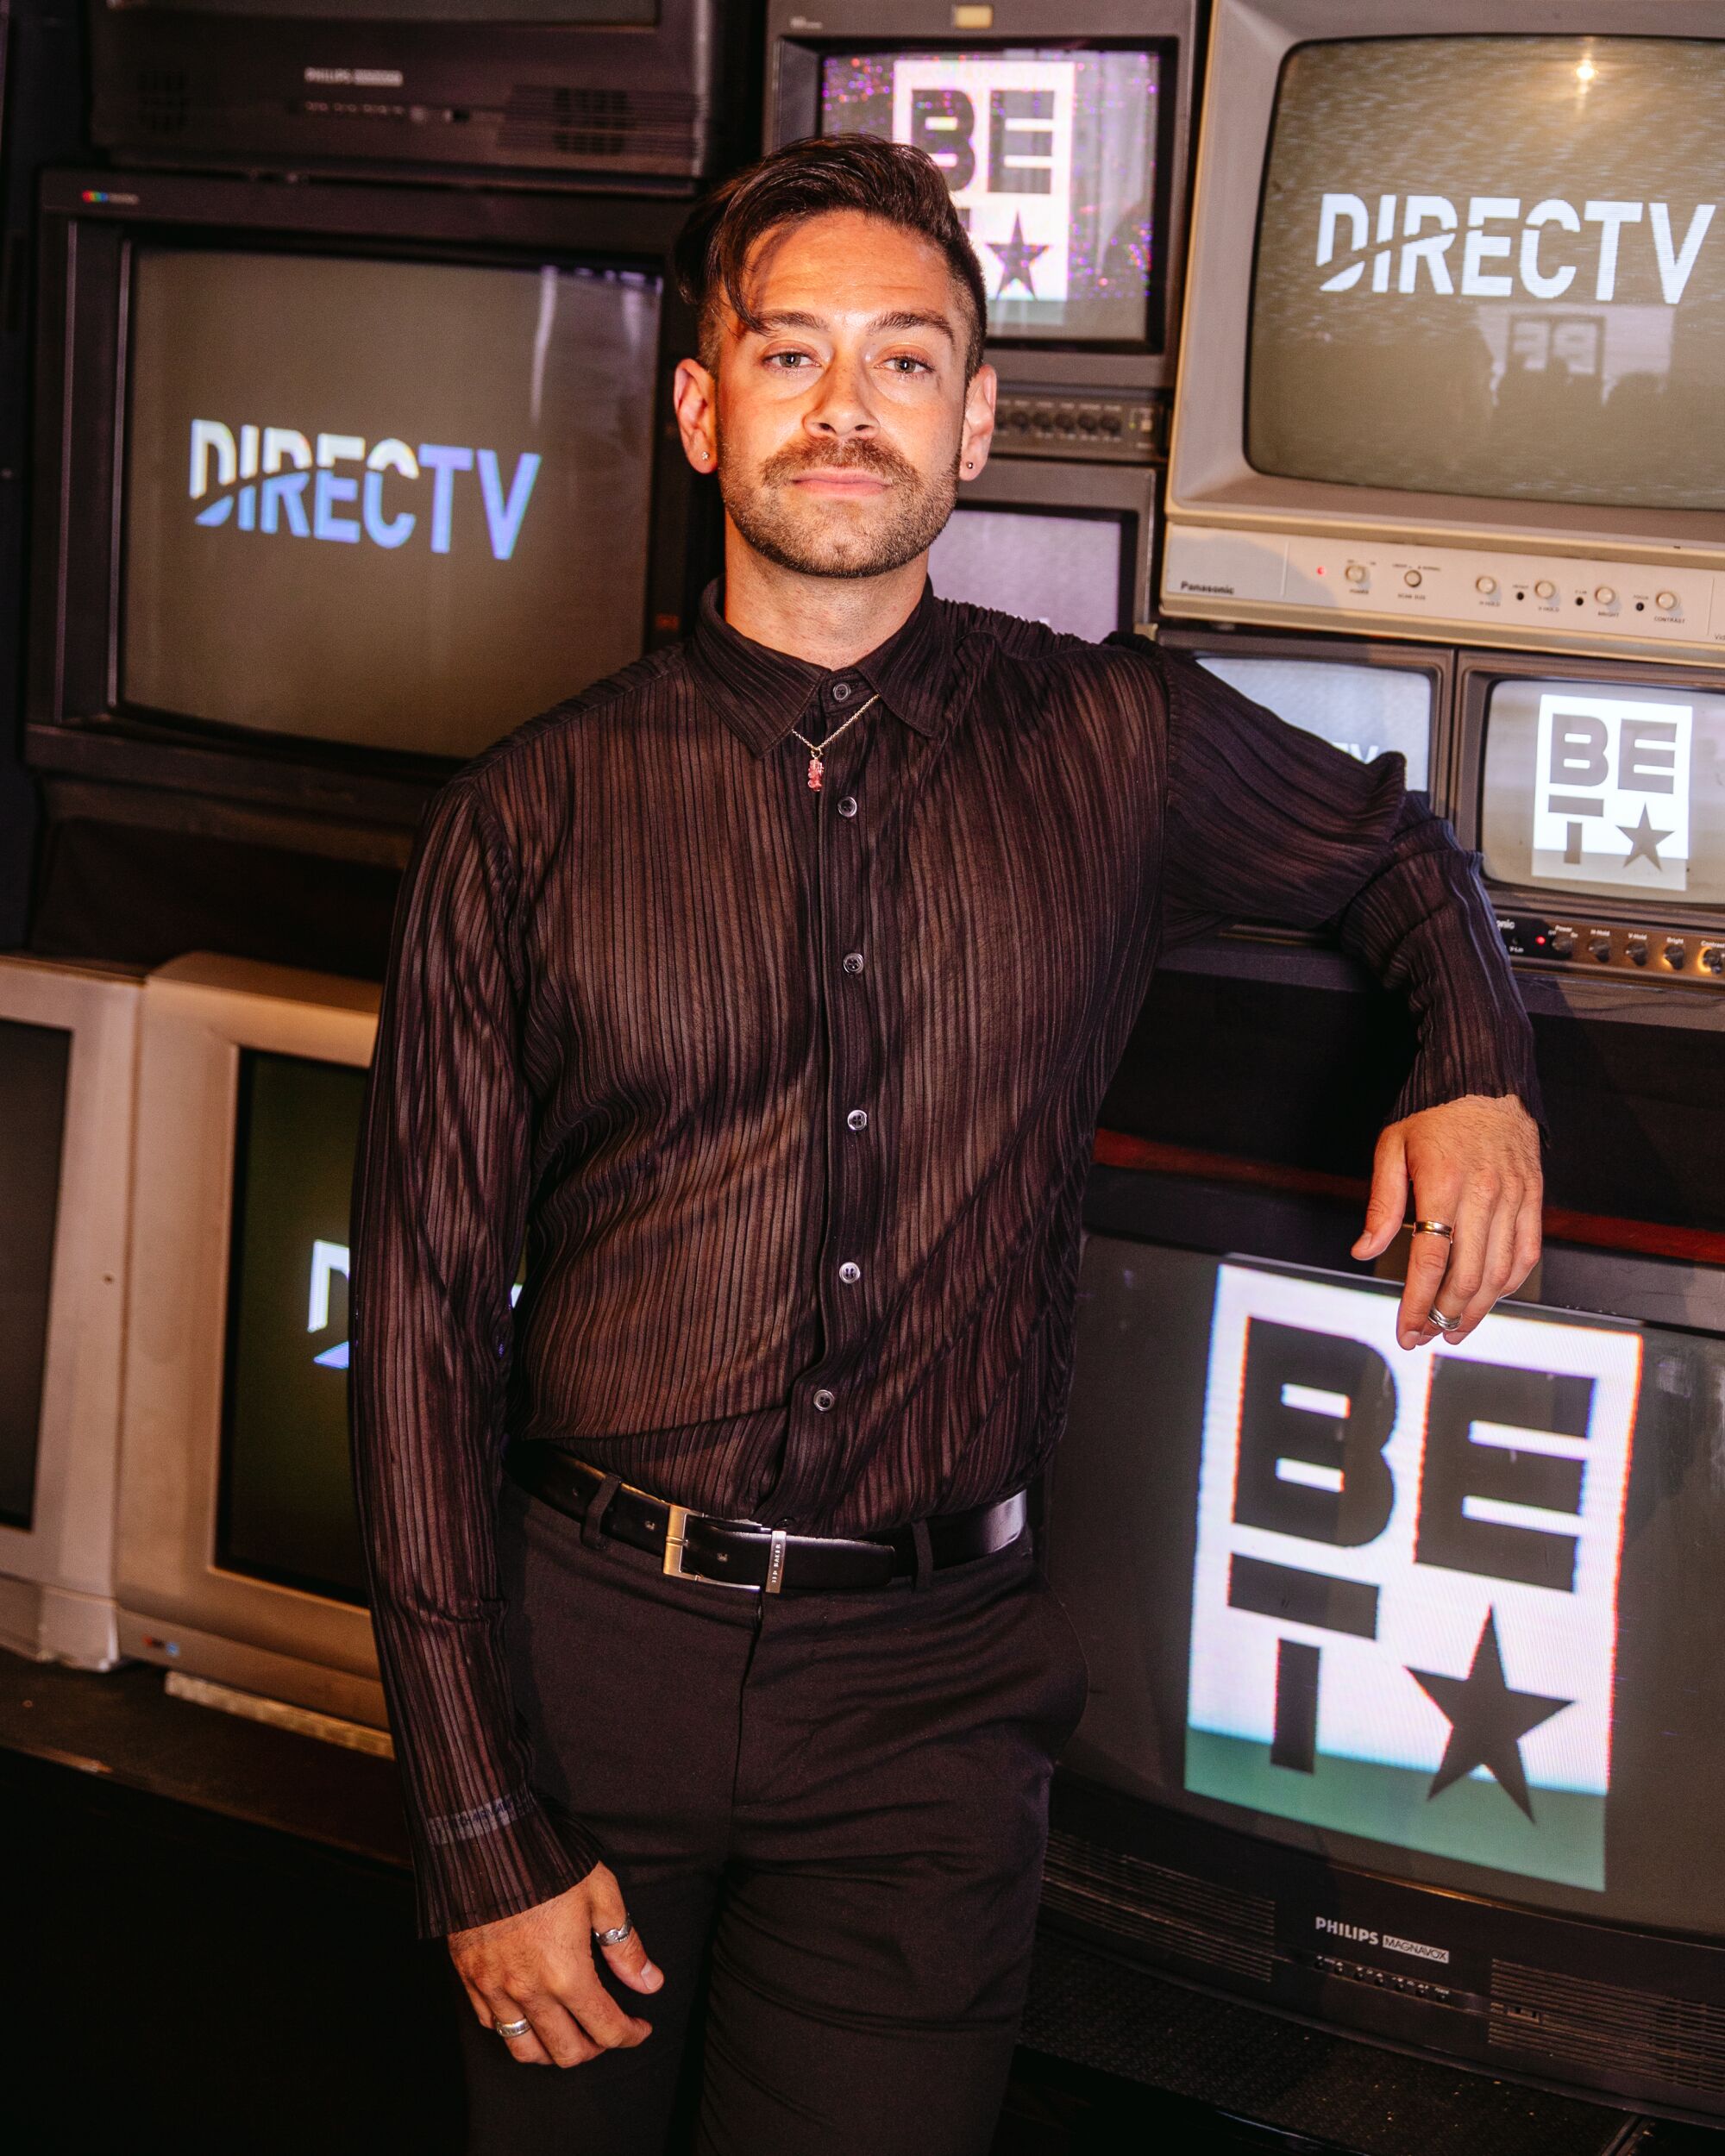 A man poses for a portrait in front of TVs.